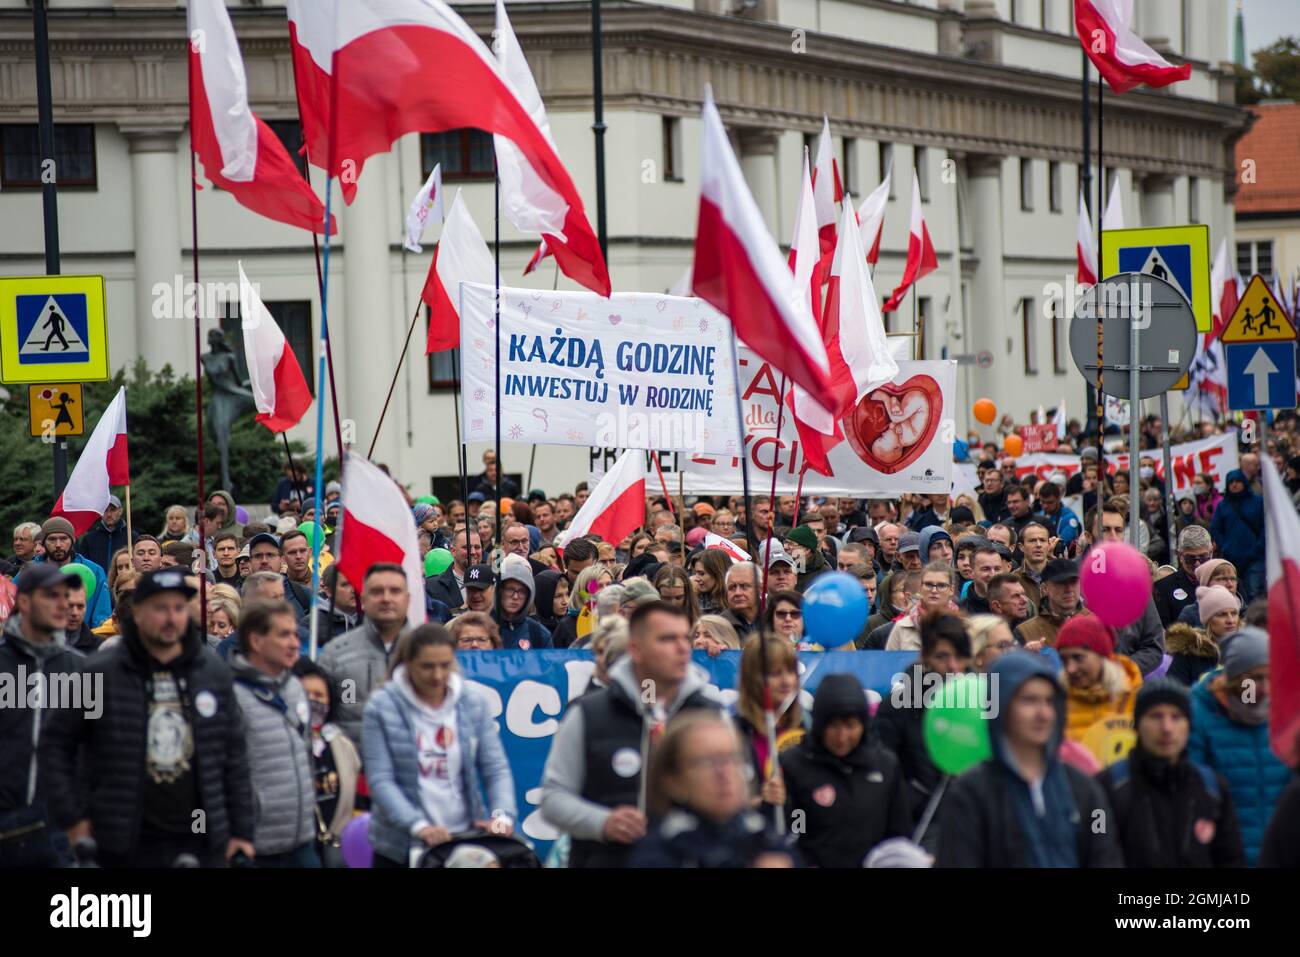 Warsaw, Poland. 19th Sep, 2021. Marchers wave flags during the demonstration.Thousands of people took part in the XVI National March of Life and Family (Narodowy Marsz Zycia i Rodziny) in Warsaw which was held under the slogan 'Dad - be, lead, protect'. As the organizers of the event announced earlier, it was aimed at manifesting pro-family attitudes and pro-life values. The event's main organizer was the Center of Life and Family. Credit: SOPA Images Limited/Alamy Live News Stock Photo